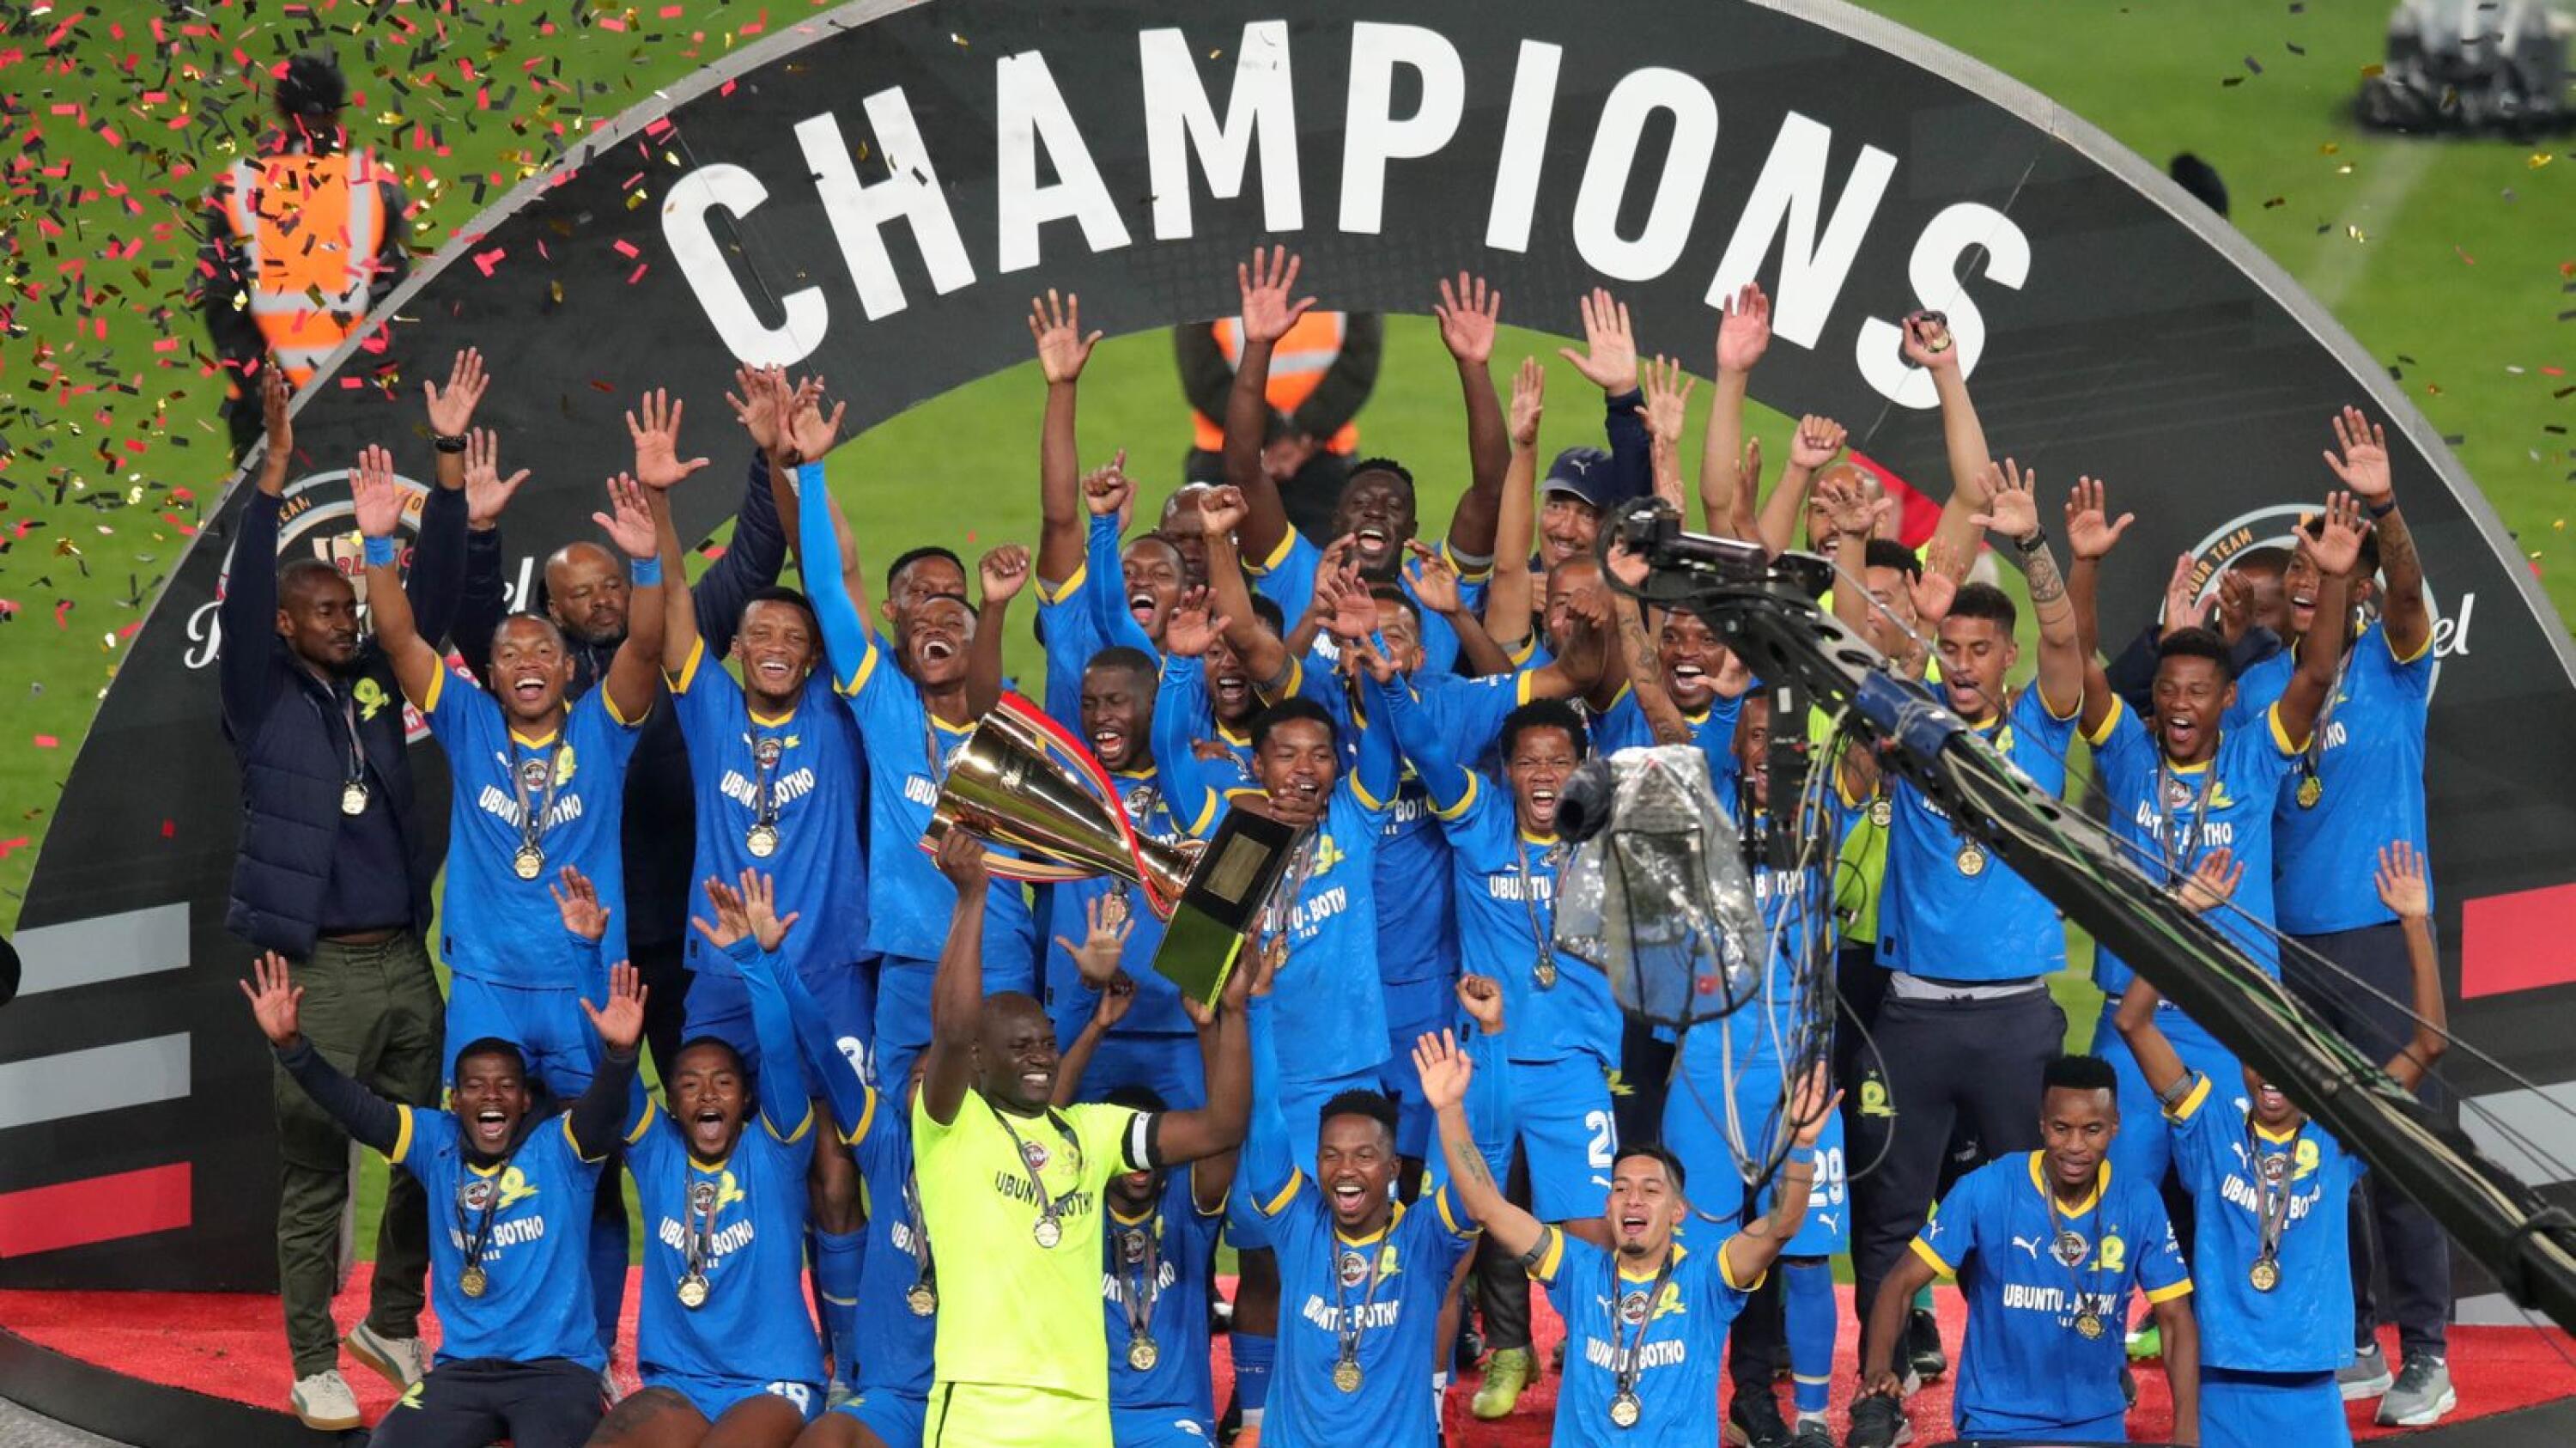 Mamelodi Sundowns celebrate with the trophy after beating Orlando Pirates in the final of the Carling Black Label Cup at FNB Stadium in Johannesburg on Saturday